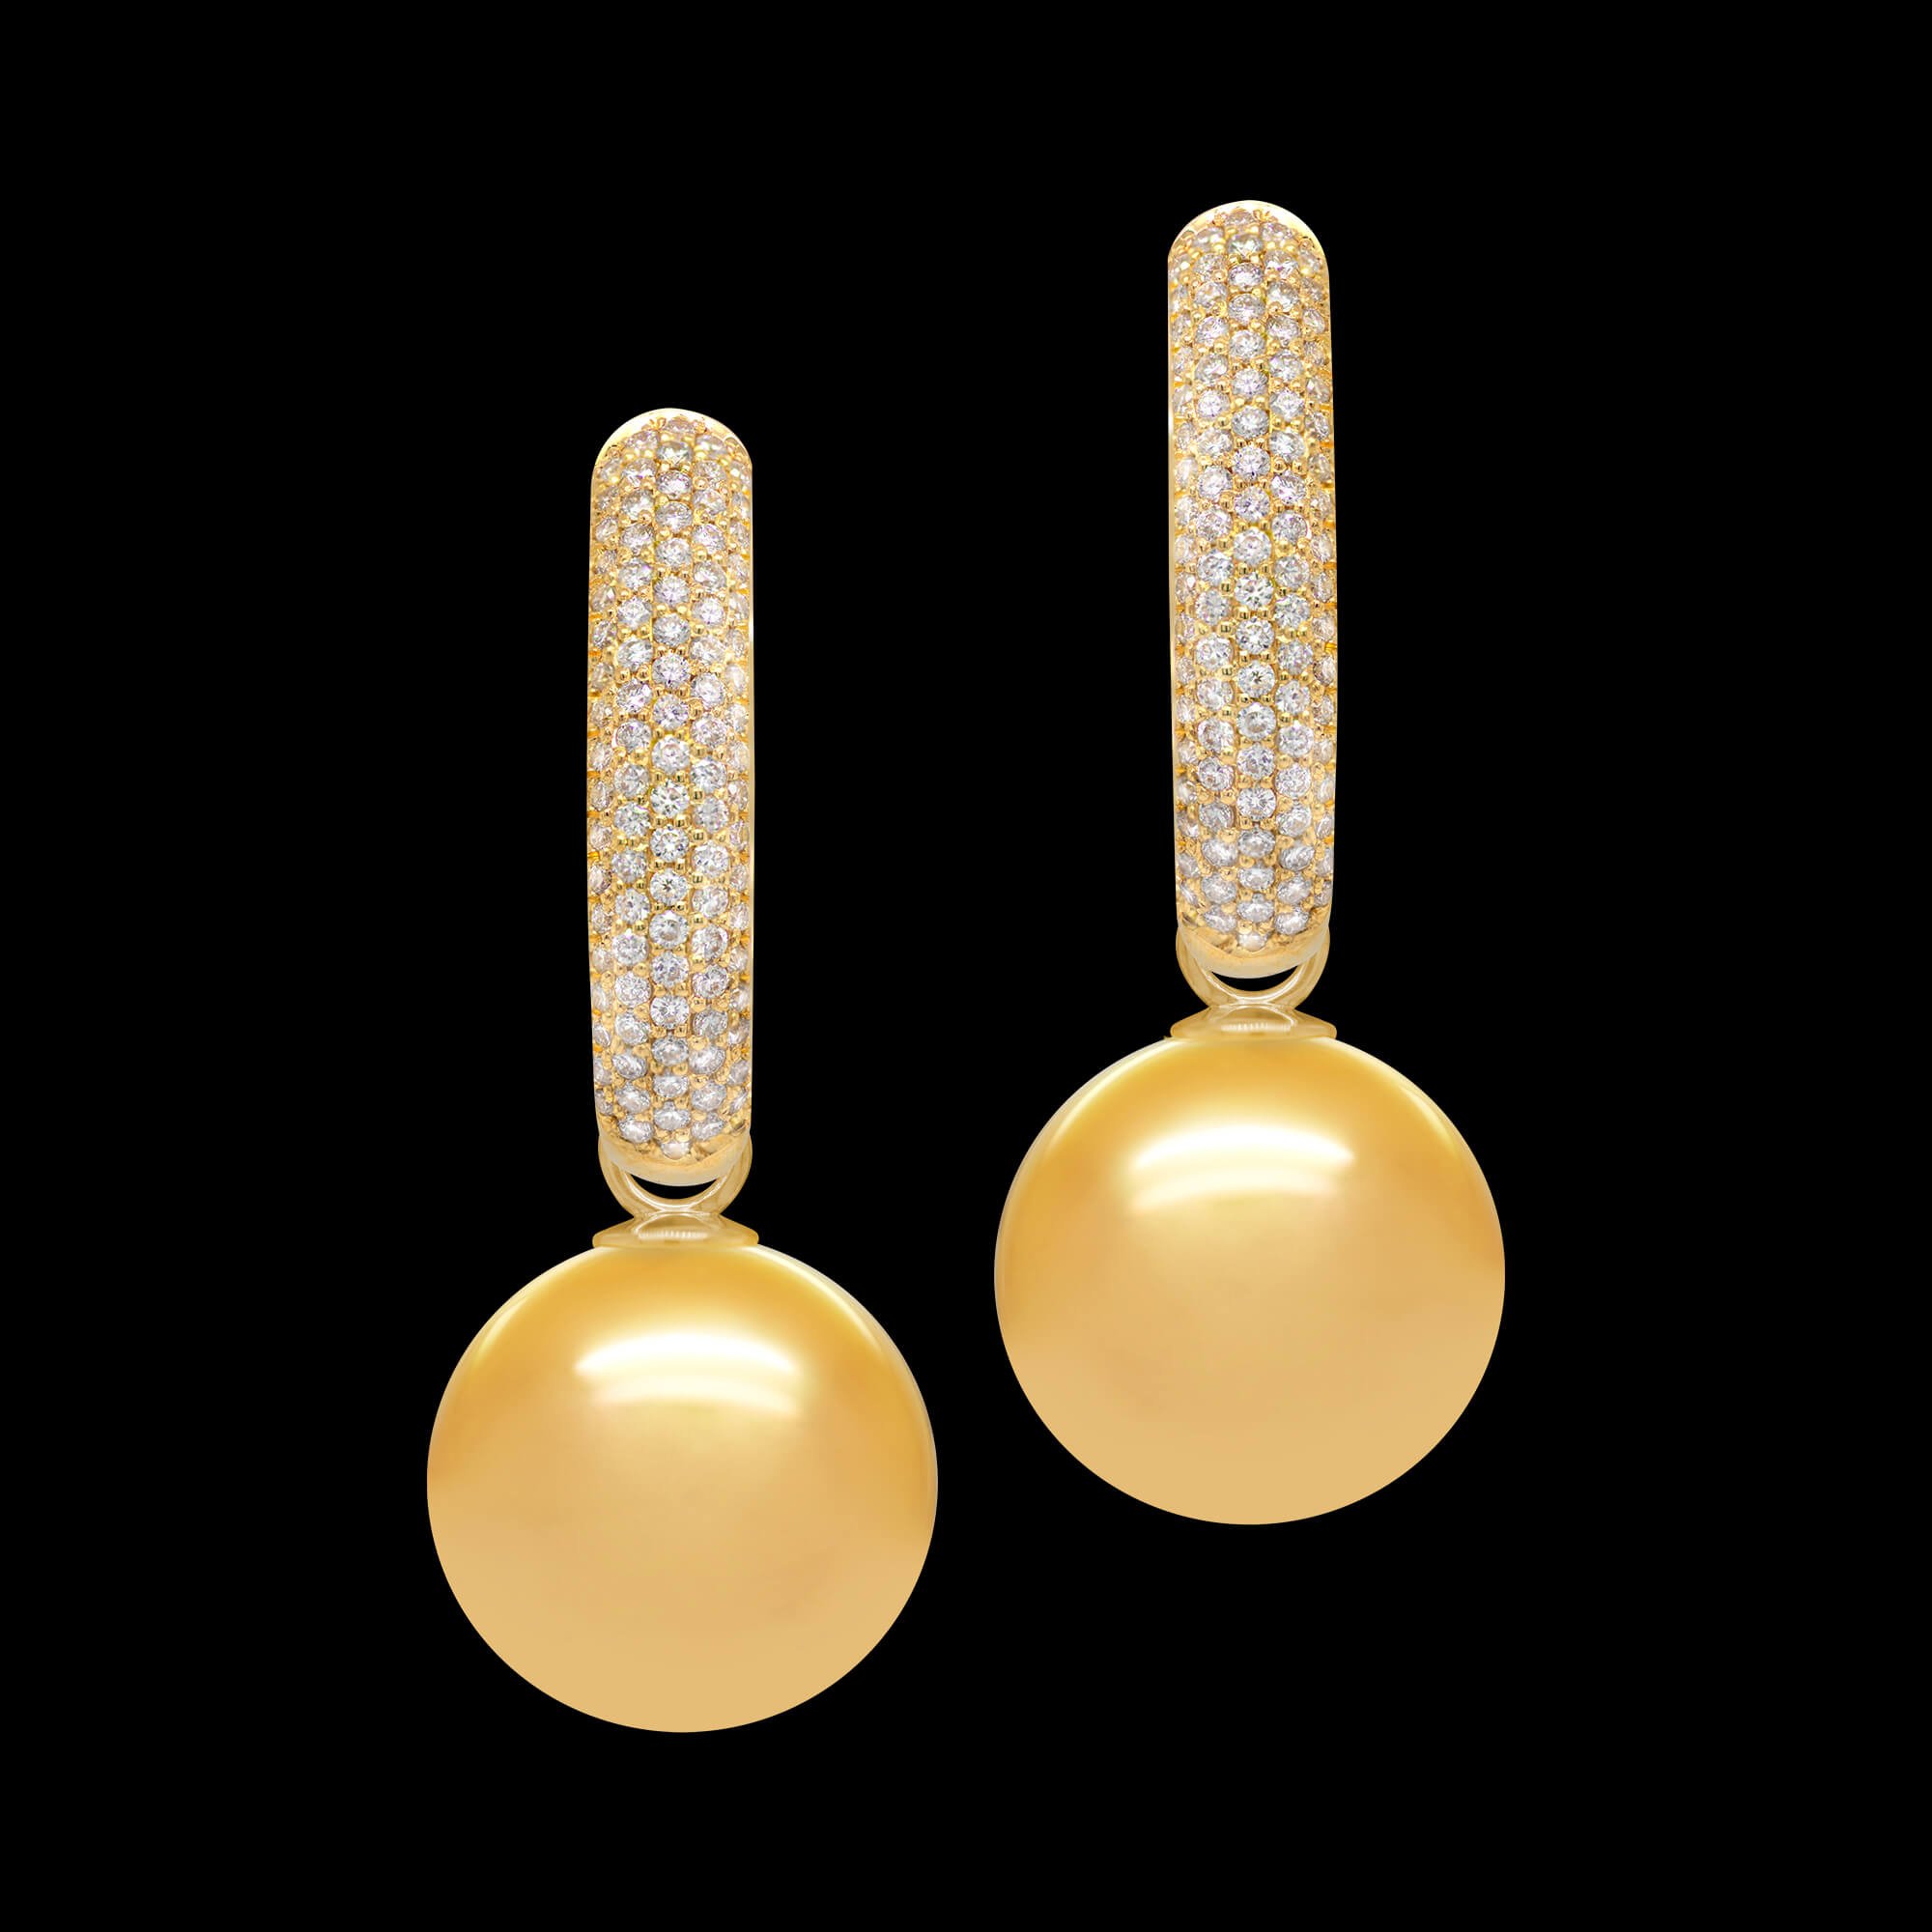 Custom 18kt yellow gold drop earrings with golden south sea pearls and detachable diamonds hoops. Front. FRIDA | Fine Jewellery.jpg